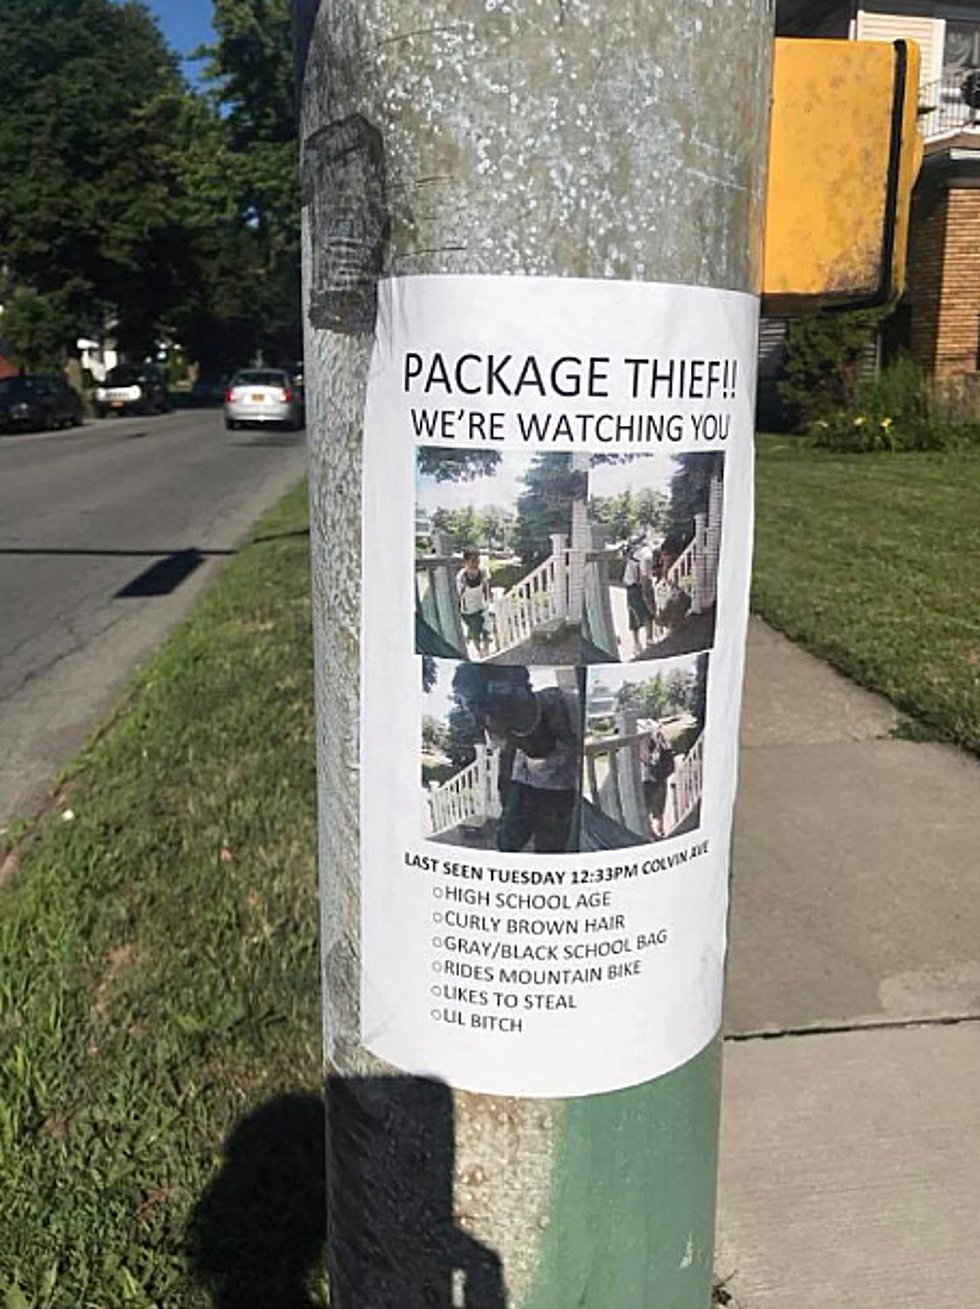 This Guy Got Caught Stealing in North Buffalo–Look What The Neighborhood Did